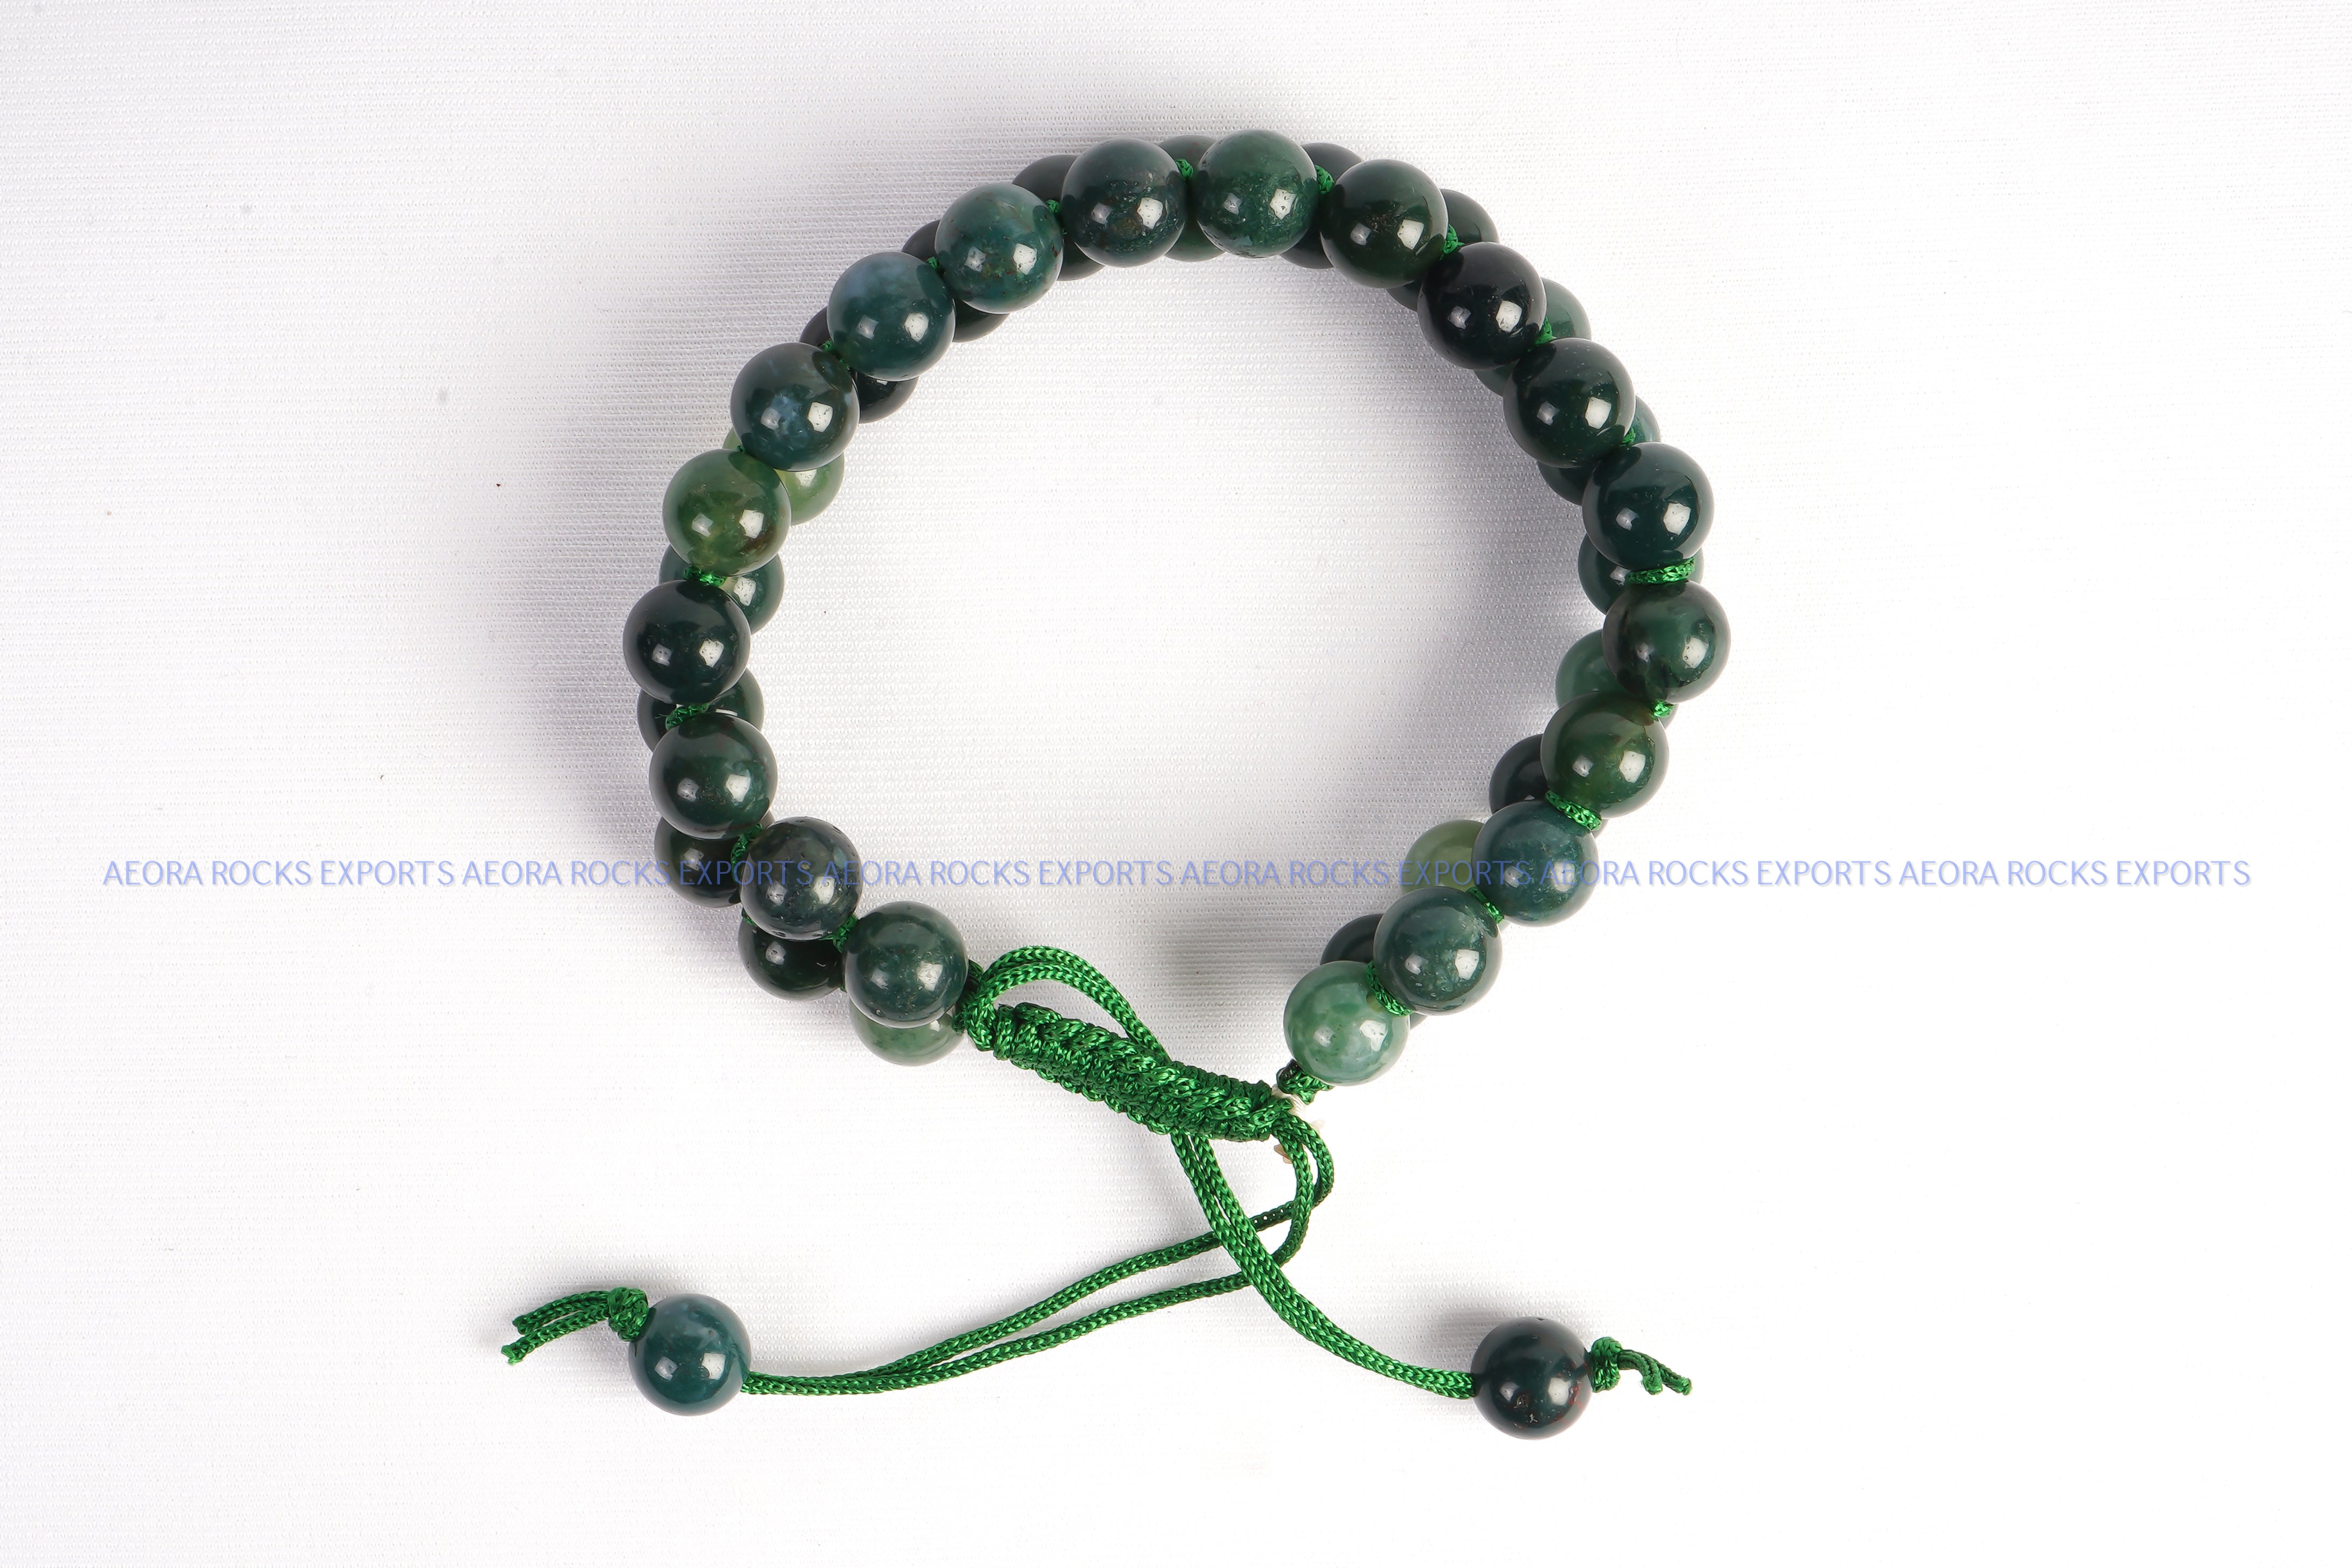 Reiki Crystal Products Unisex Certified Bloodstone Round Crystal Bracelet 8  mm Beads (Green) : Amazon.in: Jewellery